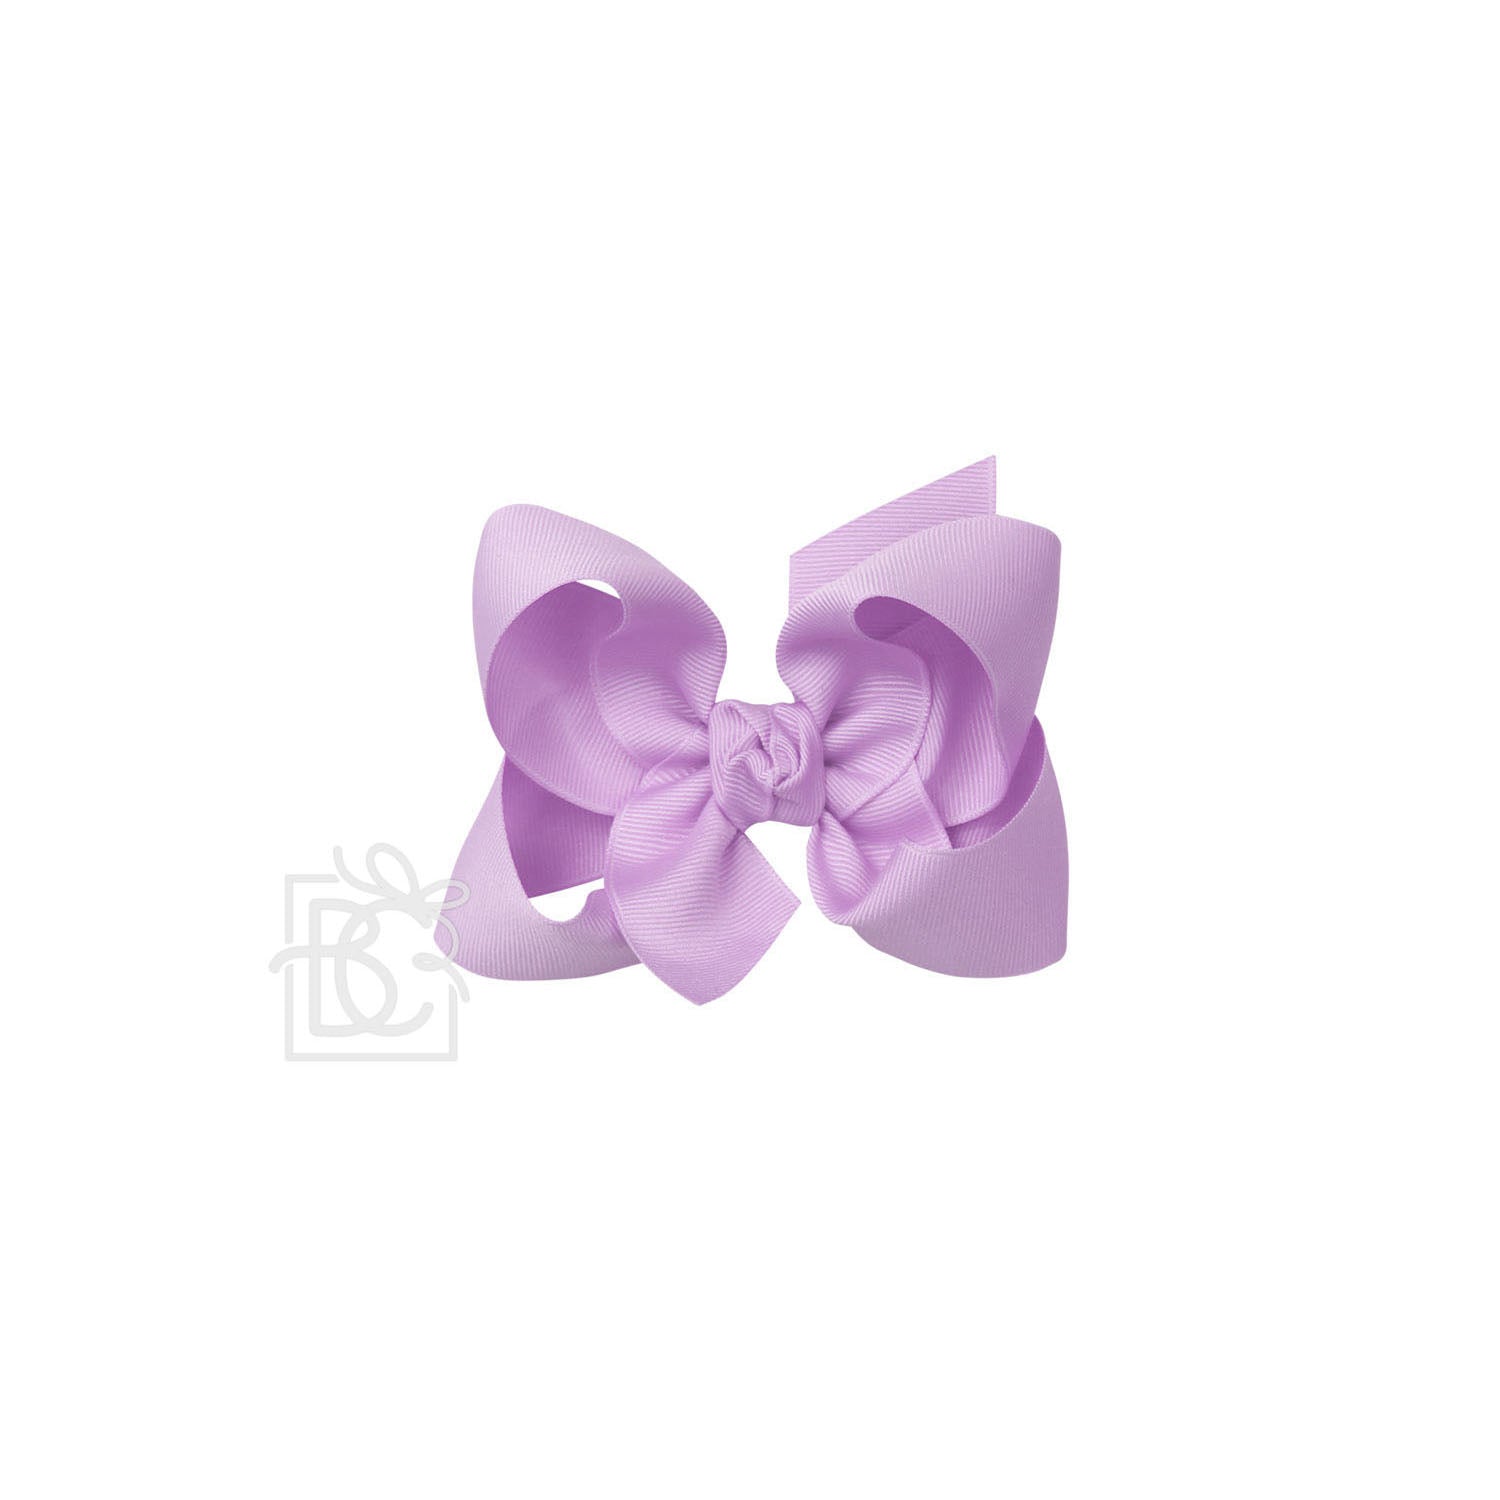 Large Bow in Light Orchid  - Doodlebug's Children's Boutique